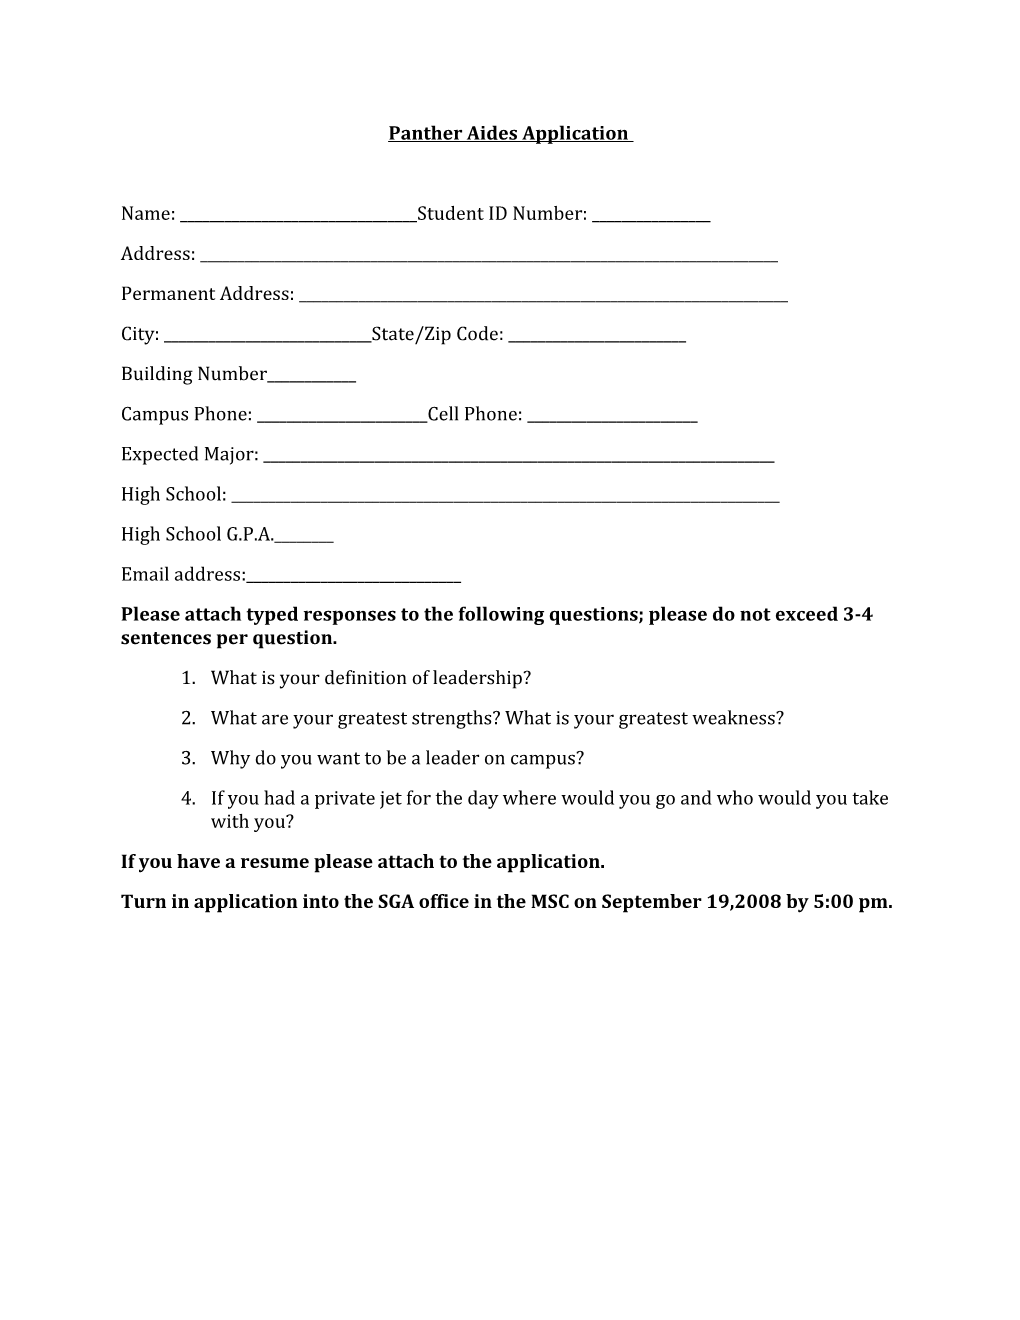 Panther Aides Application